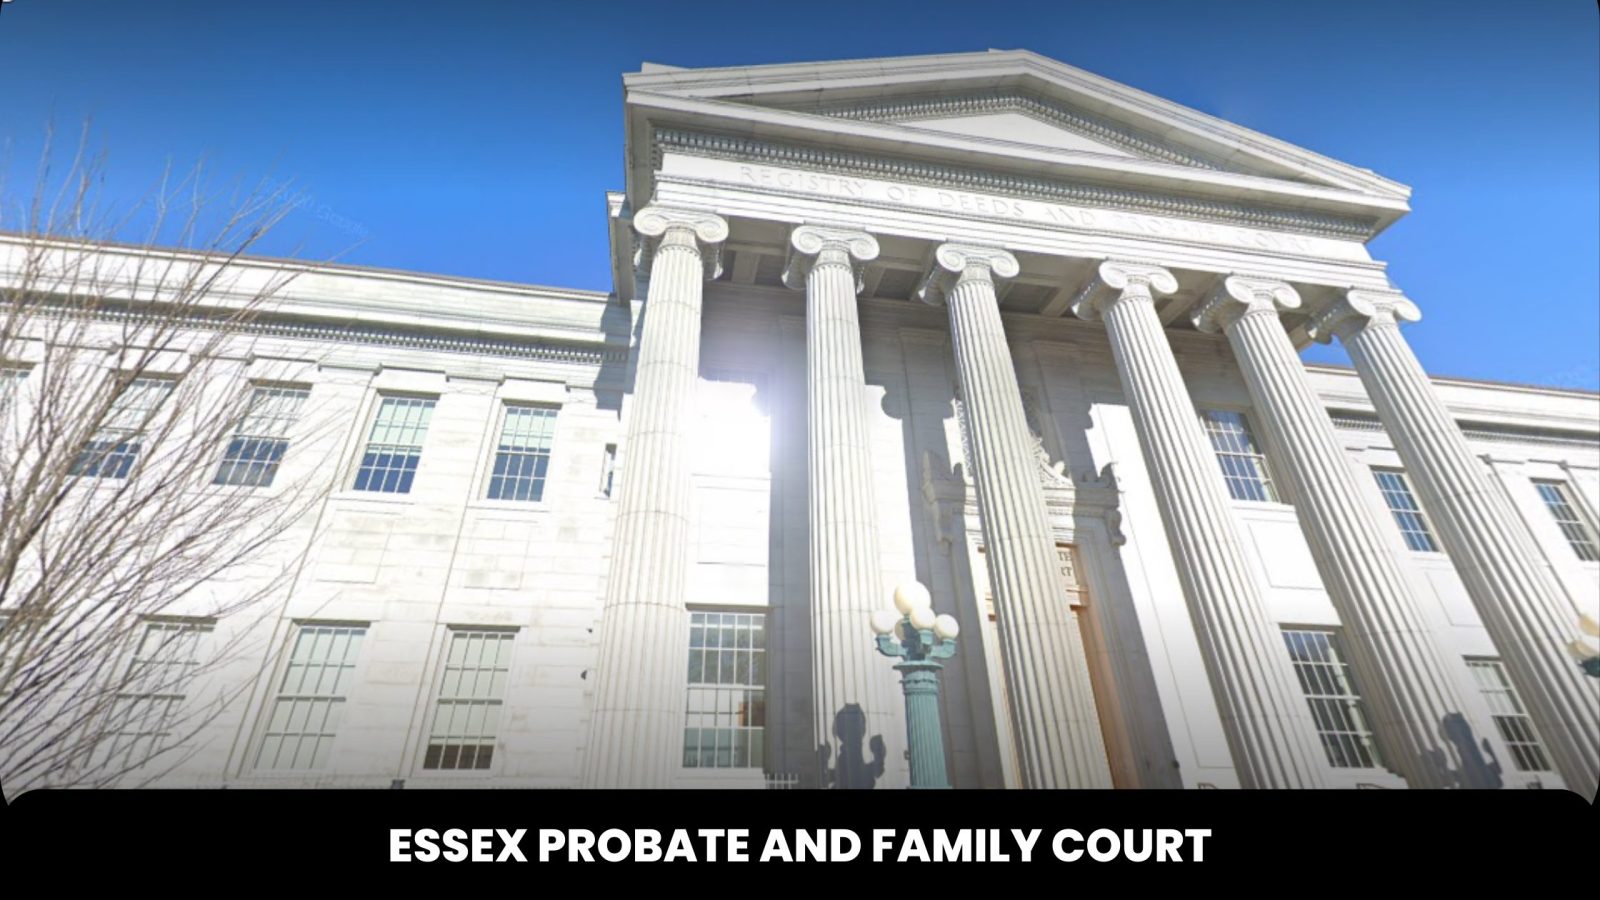 Essex Probate And Family Court